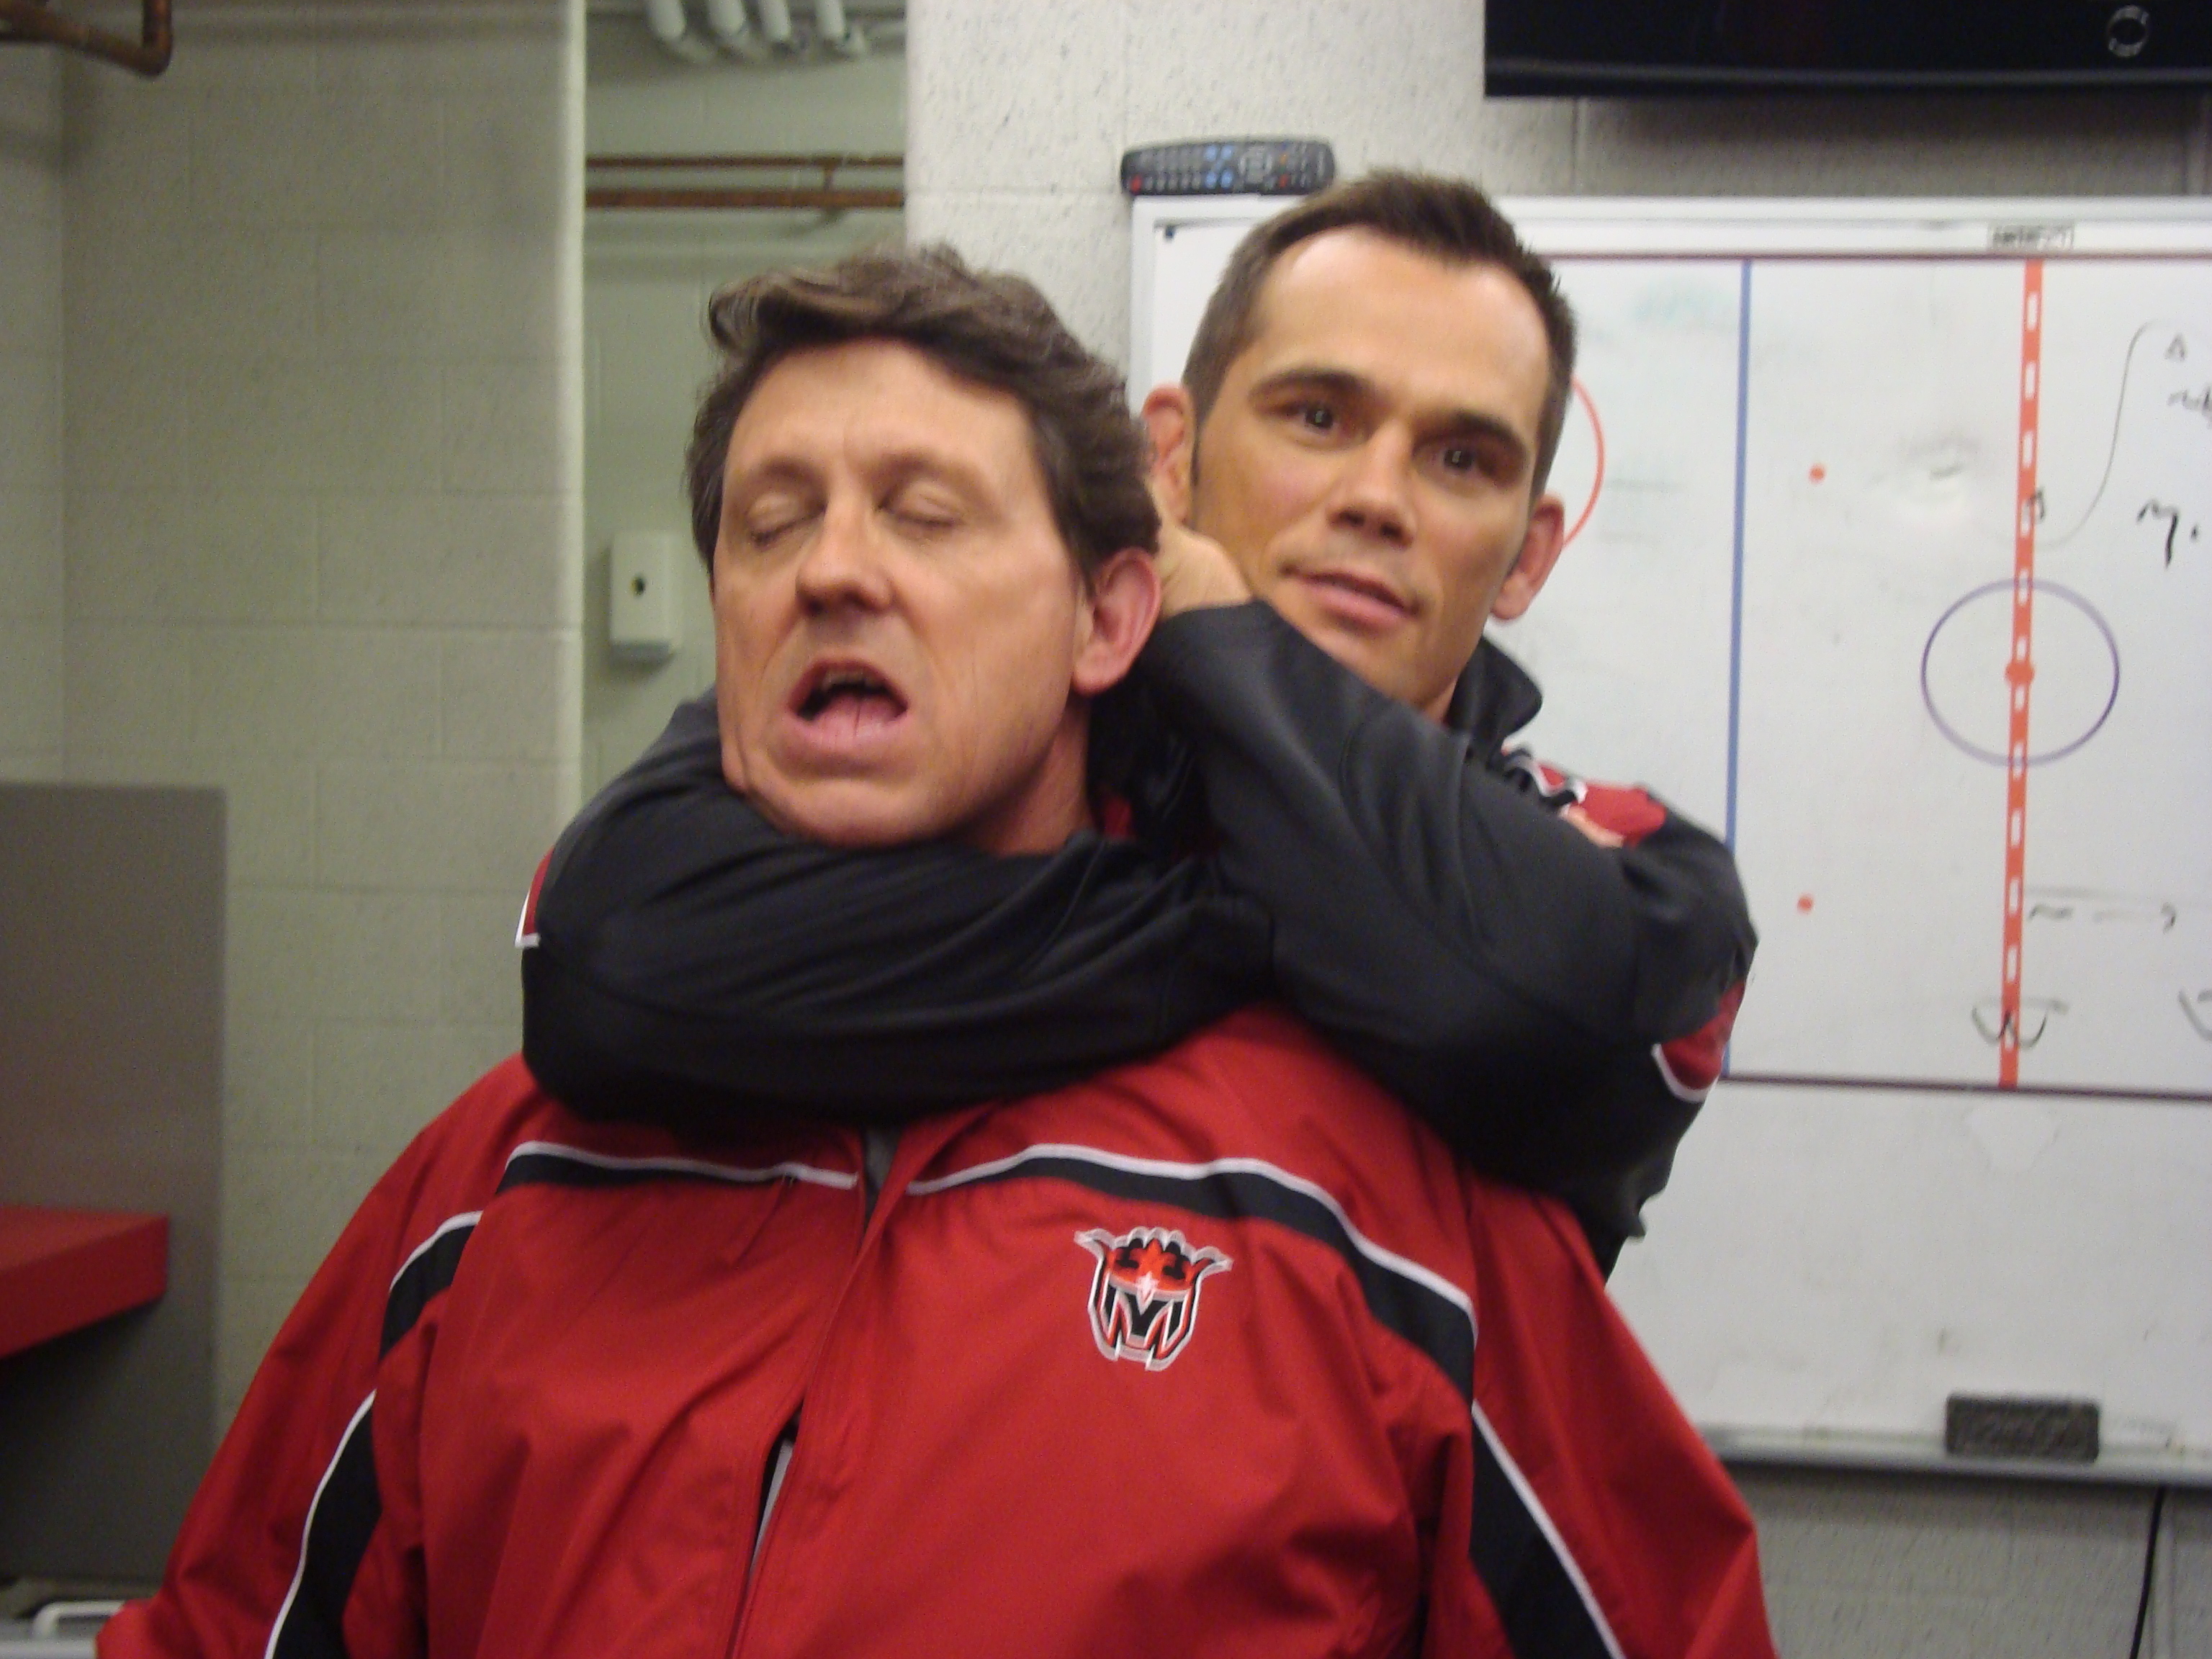 Roger getting a lesson from UFC Champ/Actor Rich Franklin on how to apply a sleeper hold during some downtime on the filming of The Genesis Code